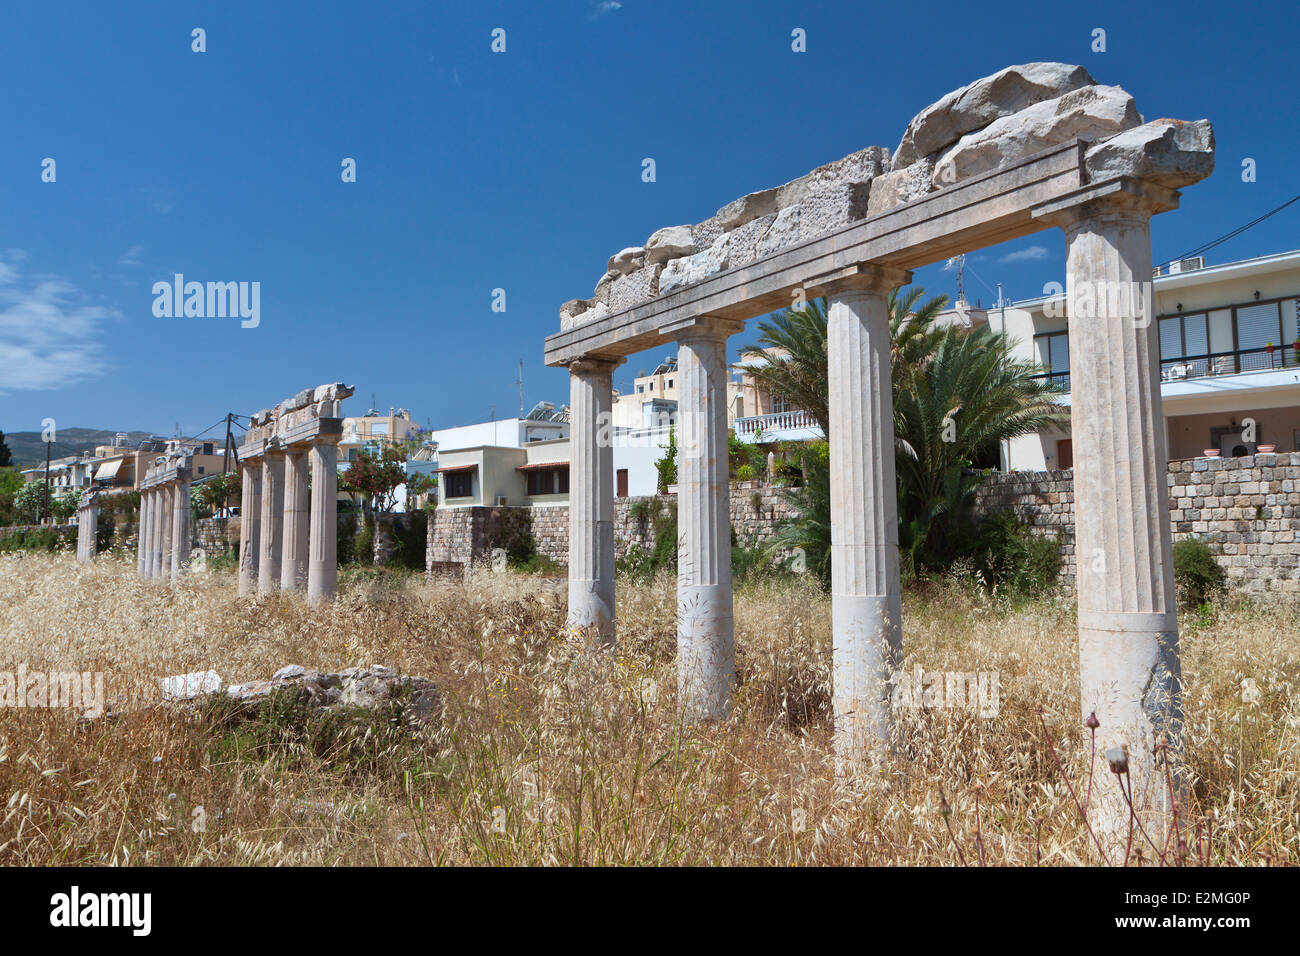 The ancient gymnasium of Kos island in Greece Stock Photo